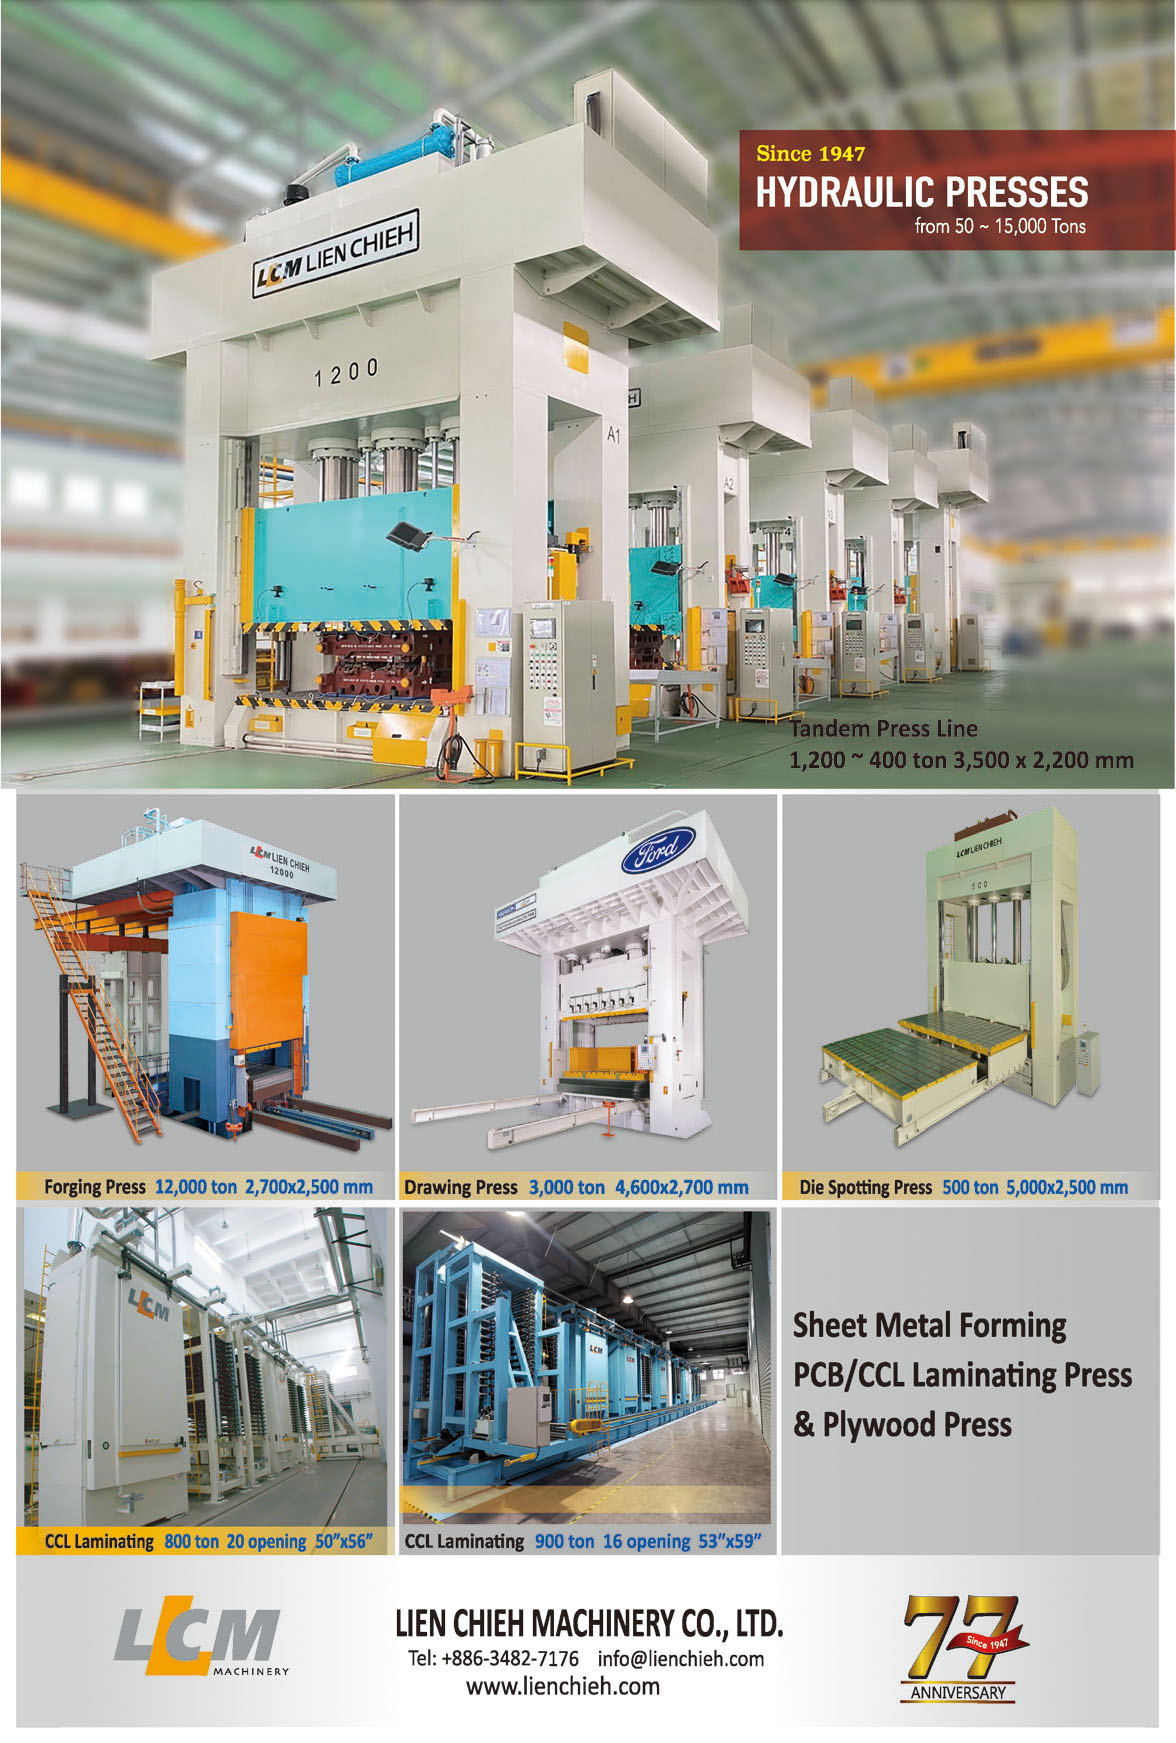 Who Makes Machinery in Taiwan LIEN CHIEH MACHINERY CO., LTD.